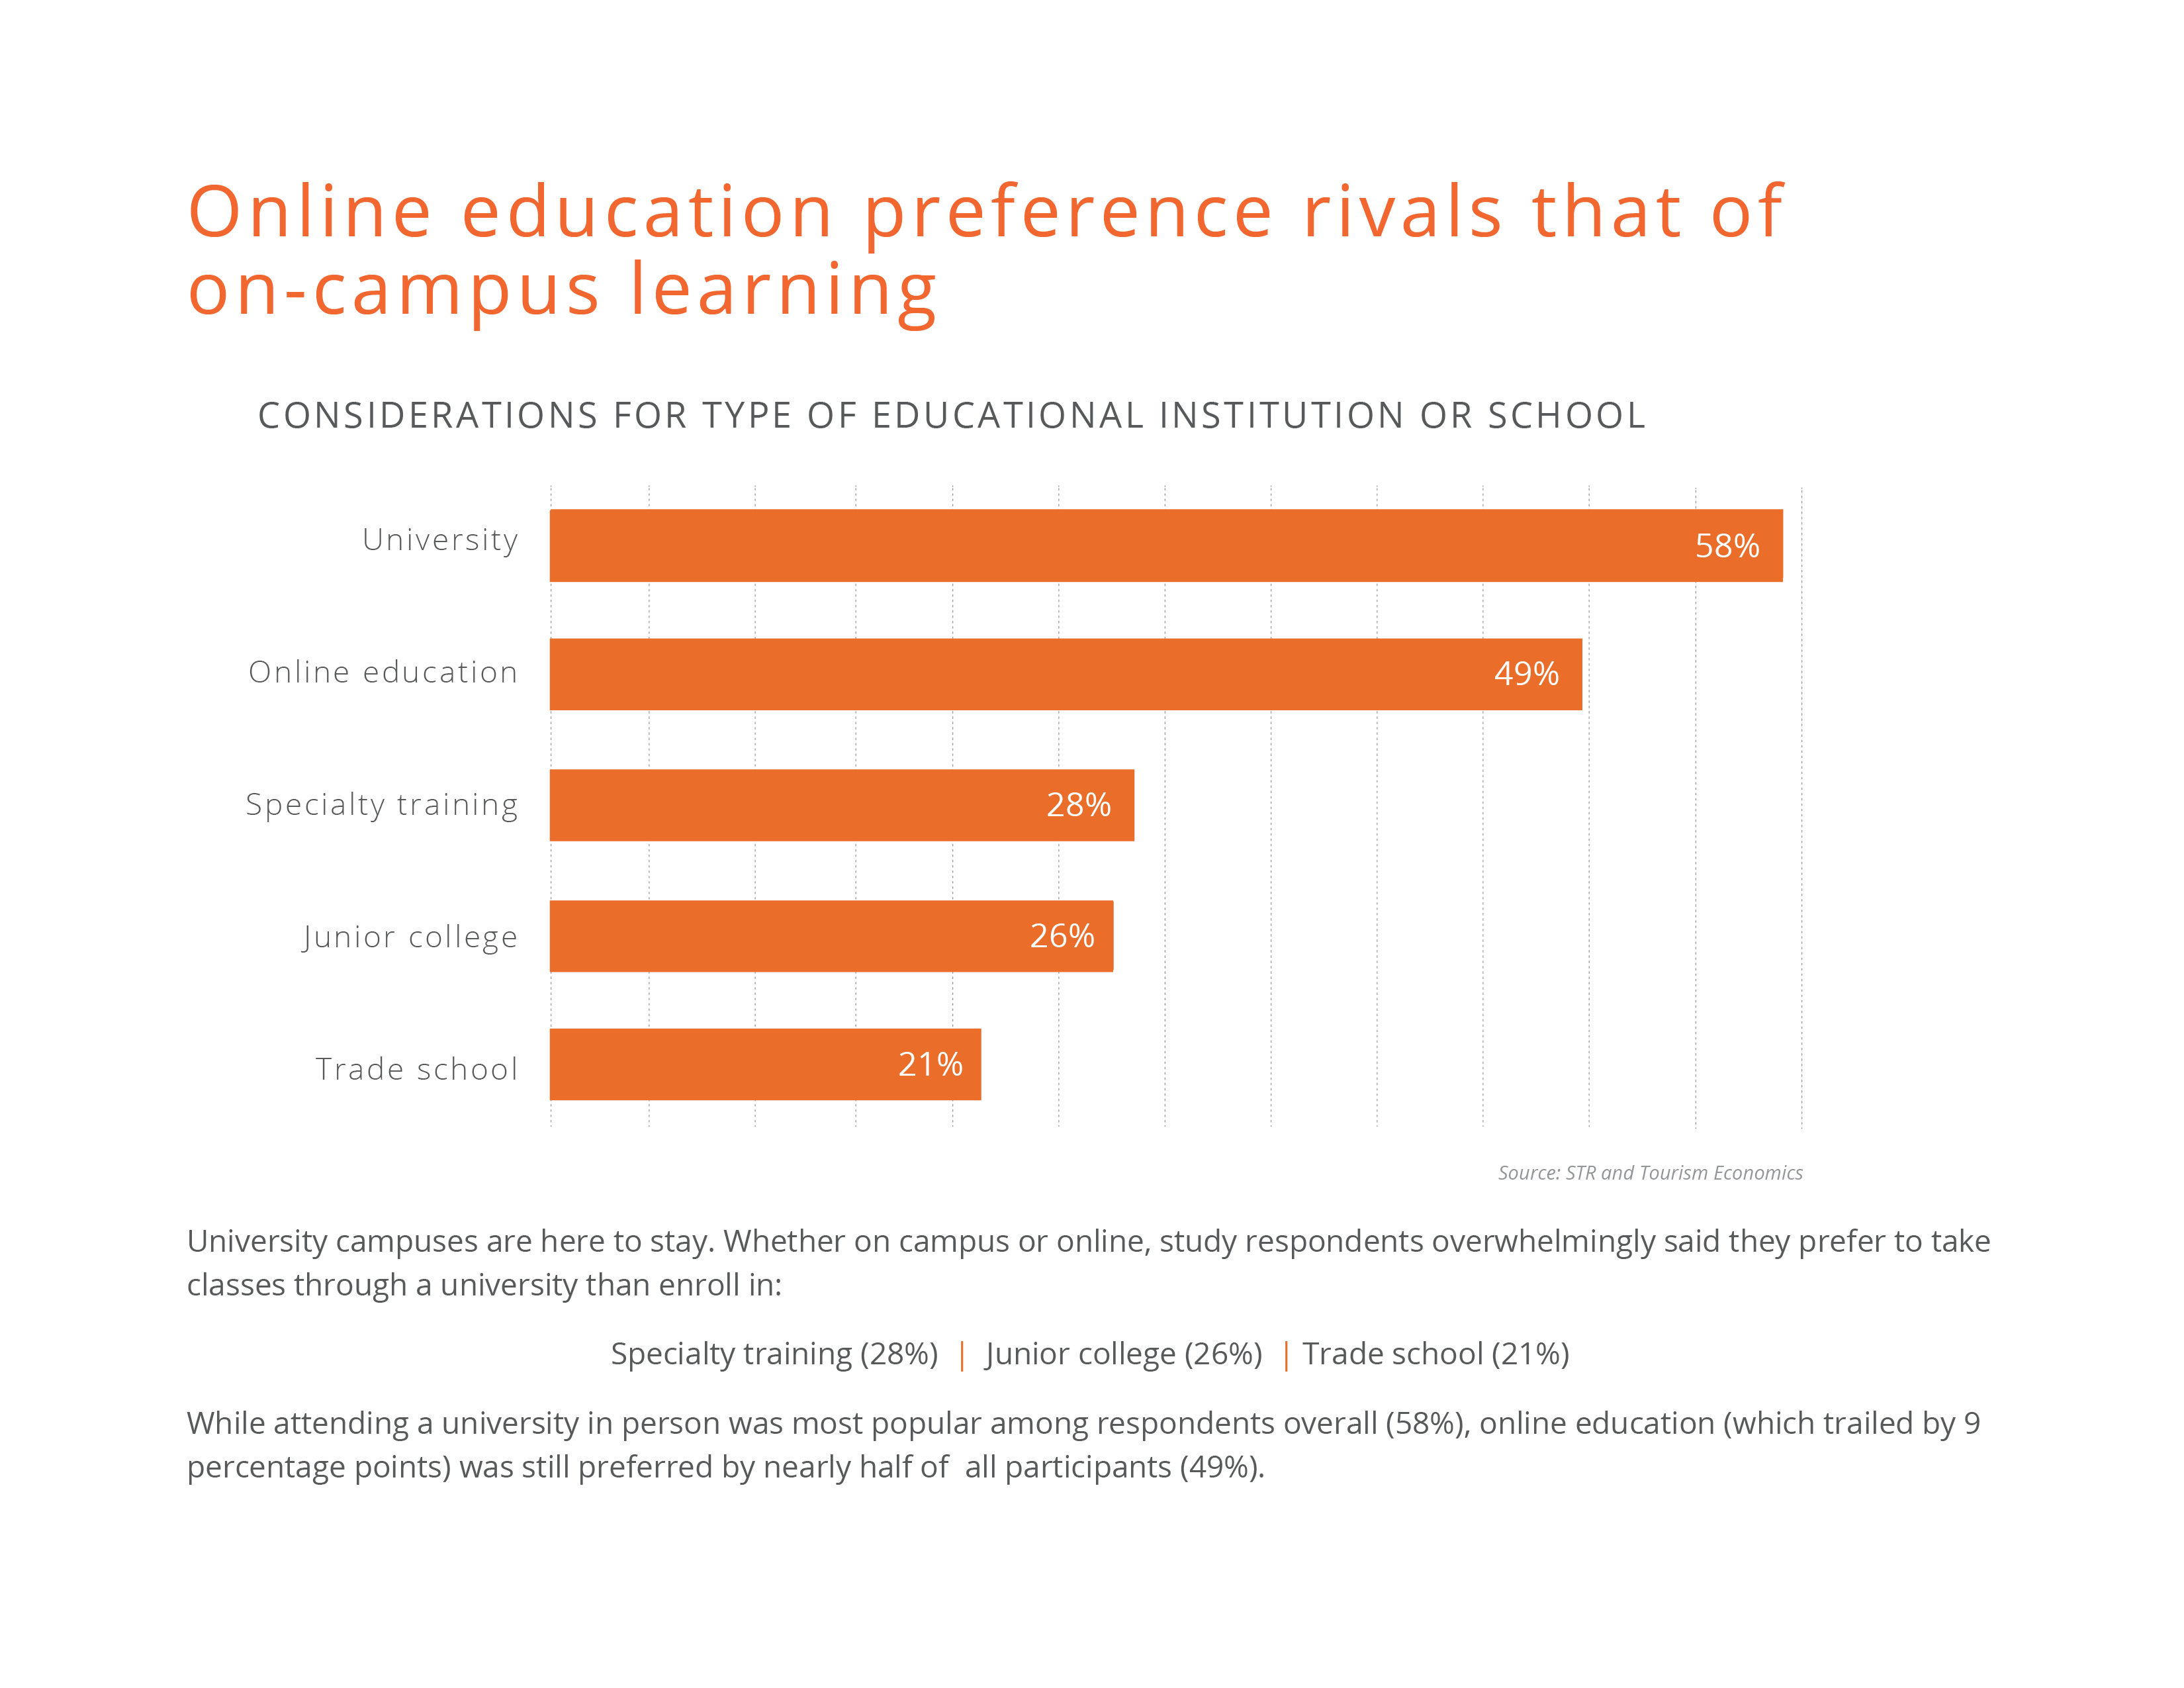 Online education preference rivals that of On-Campus Learning.